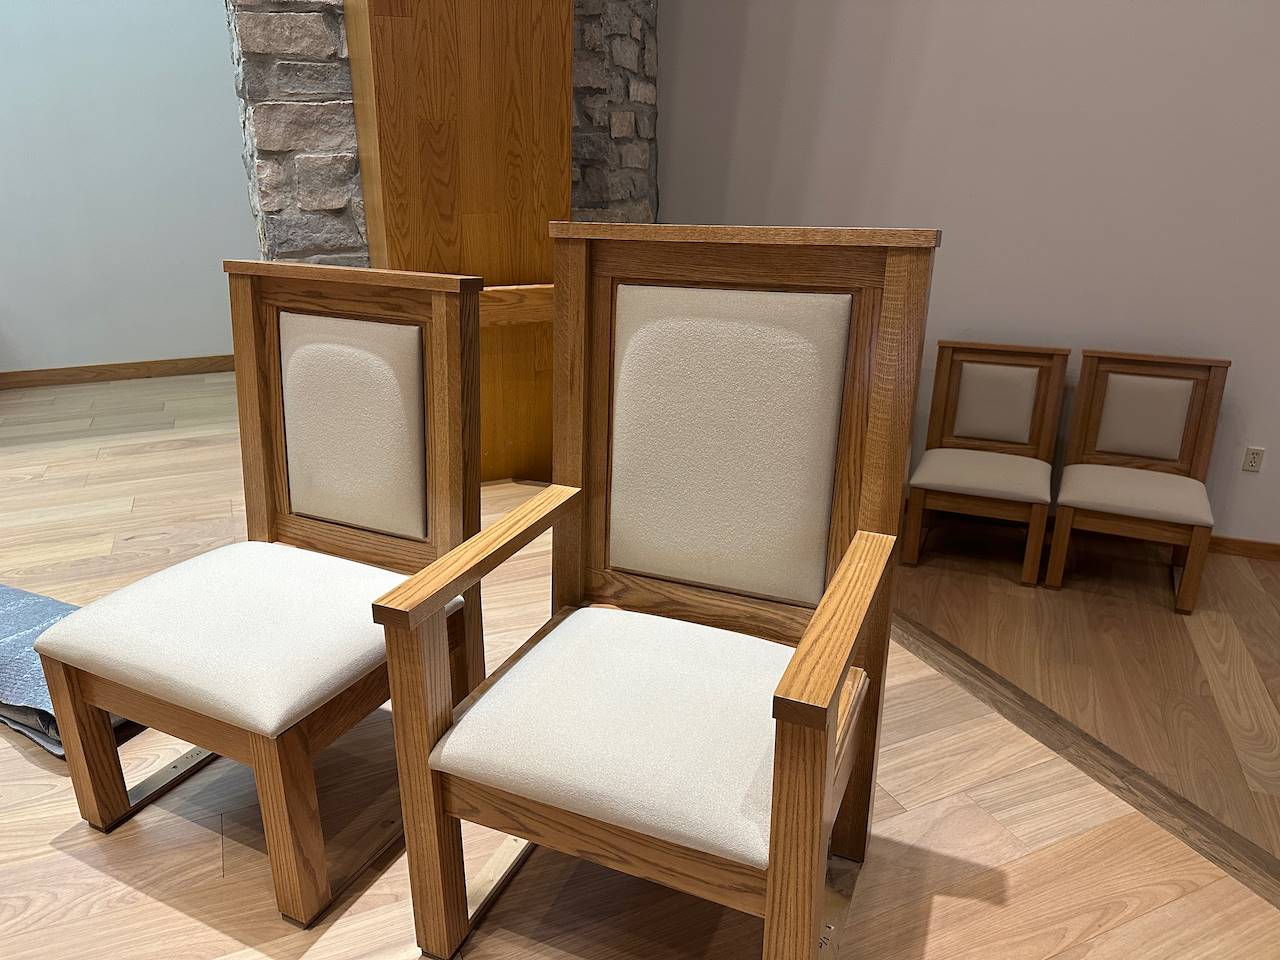 new sanctuary chairs